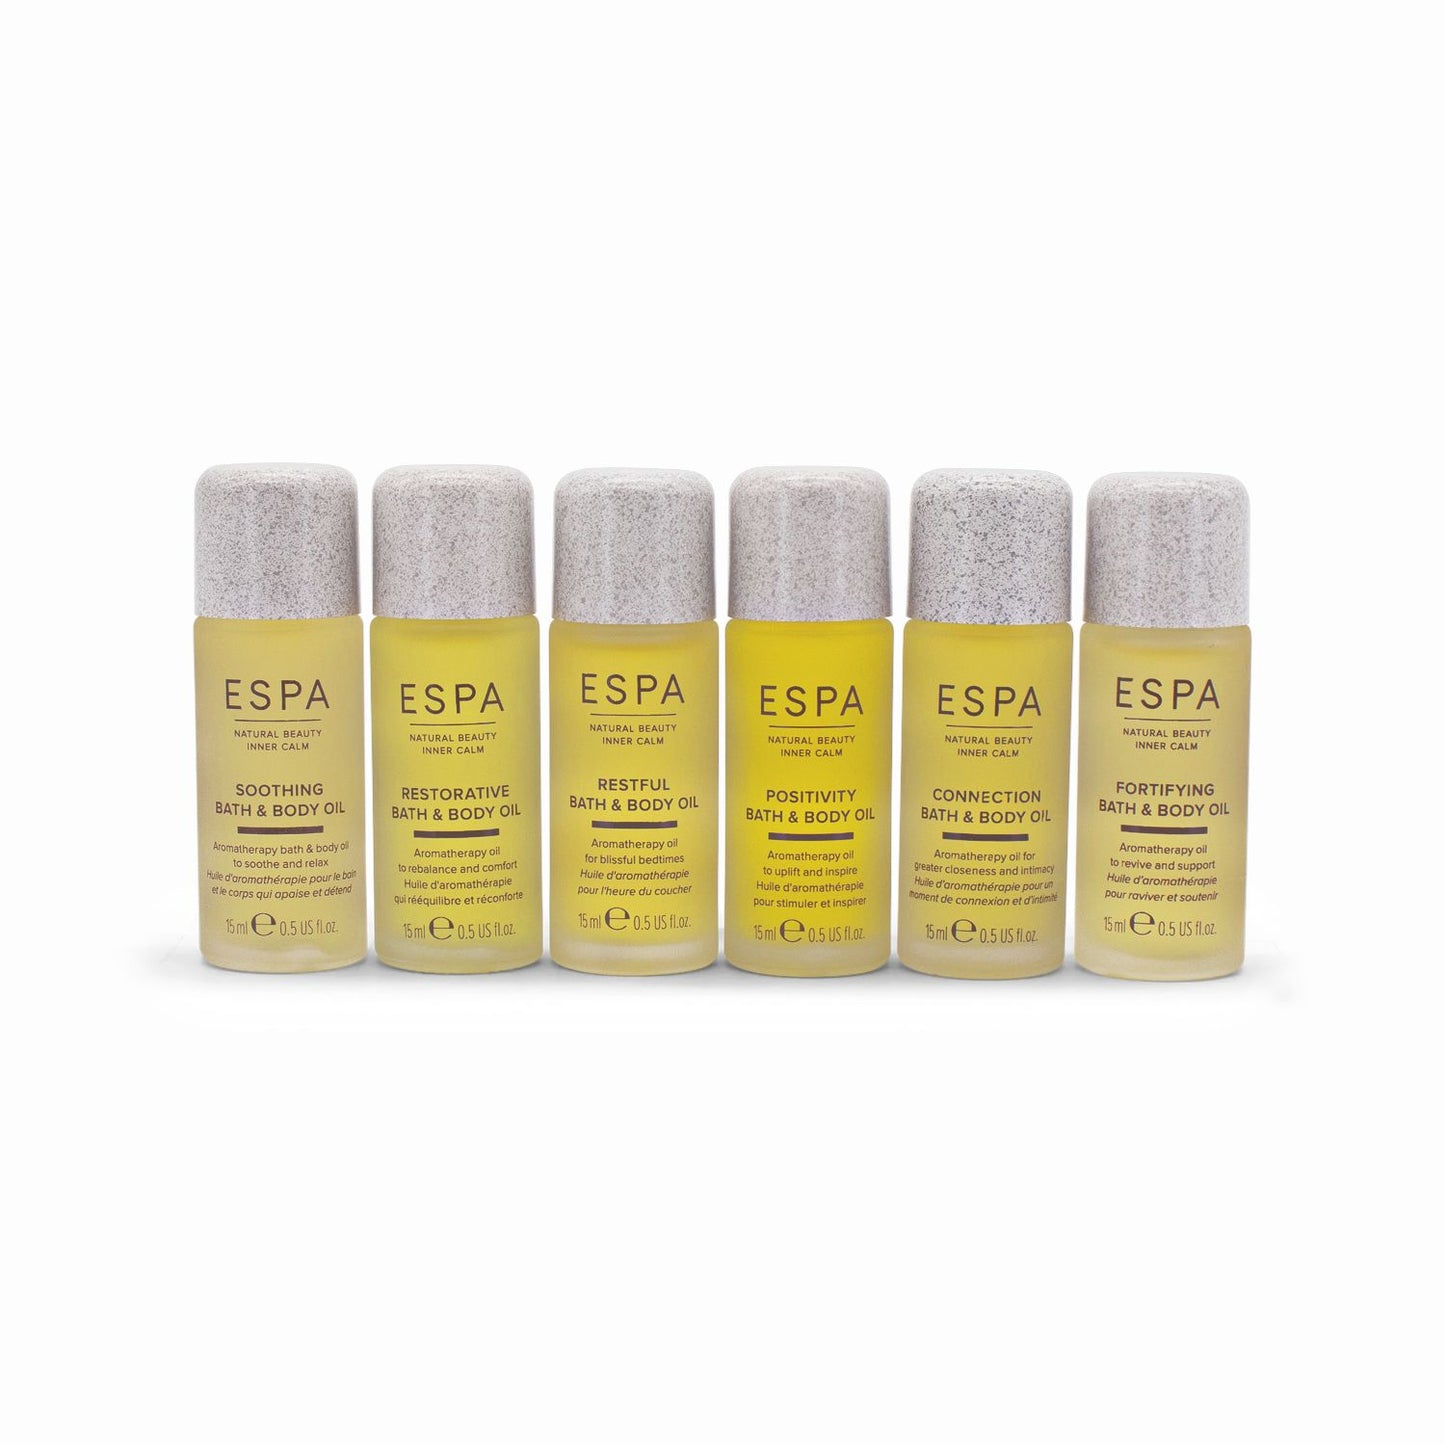 ESPA Signature Blends Aromatherapy Bath and Body Oil Collection - Imperfect Box